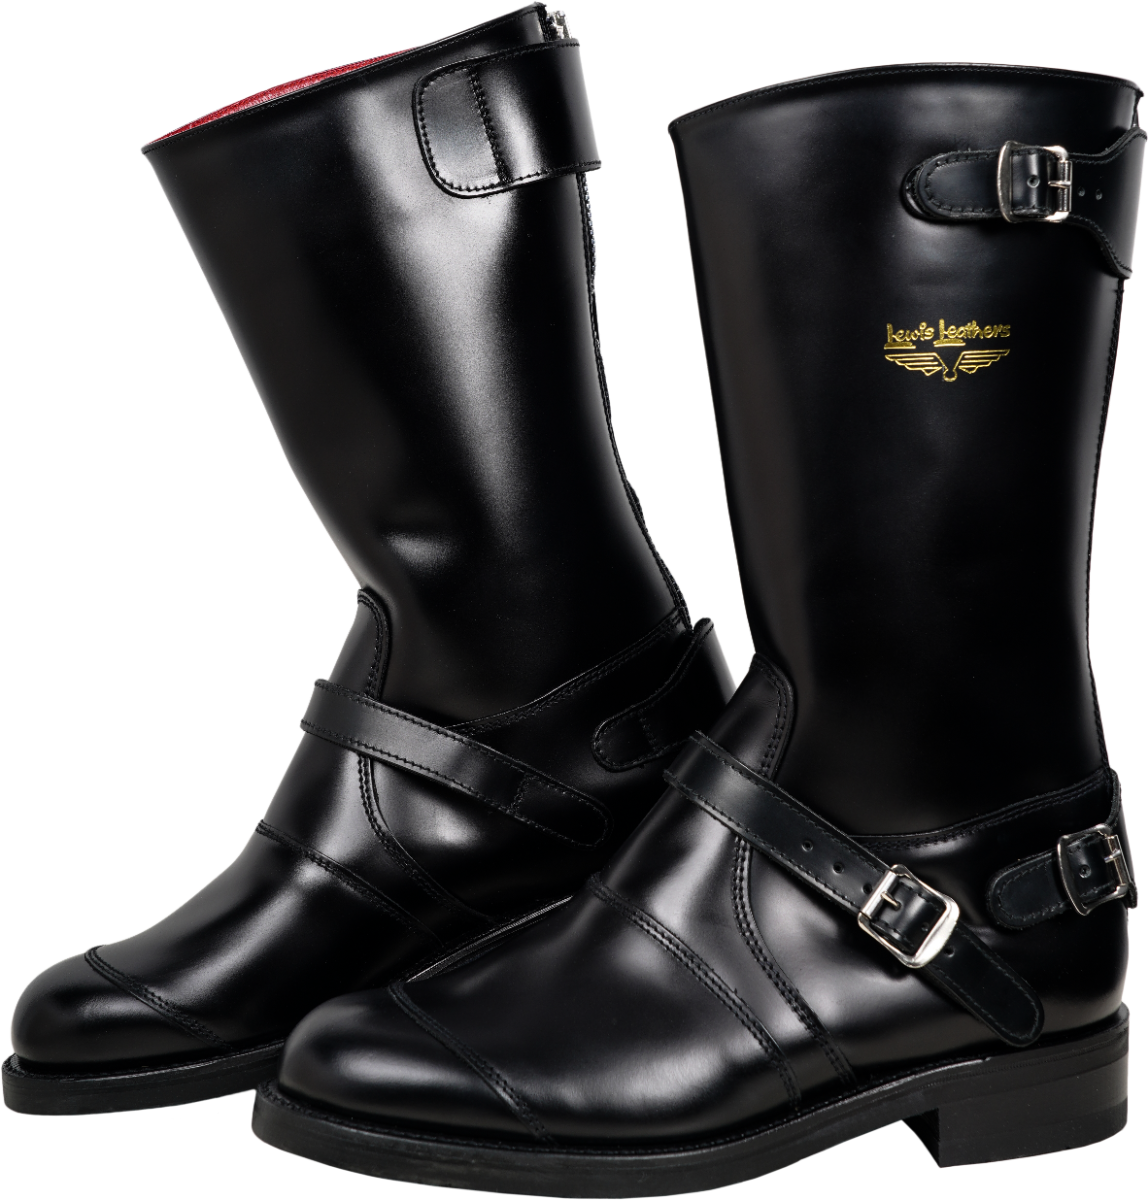 Westway Boots No.W10 - Lewis Leathers Japan